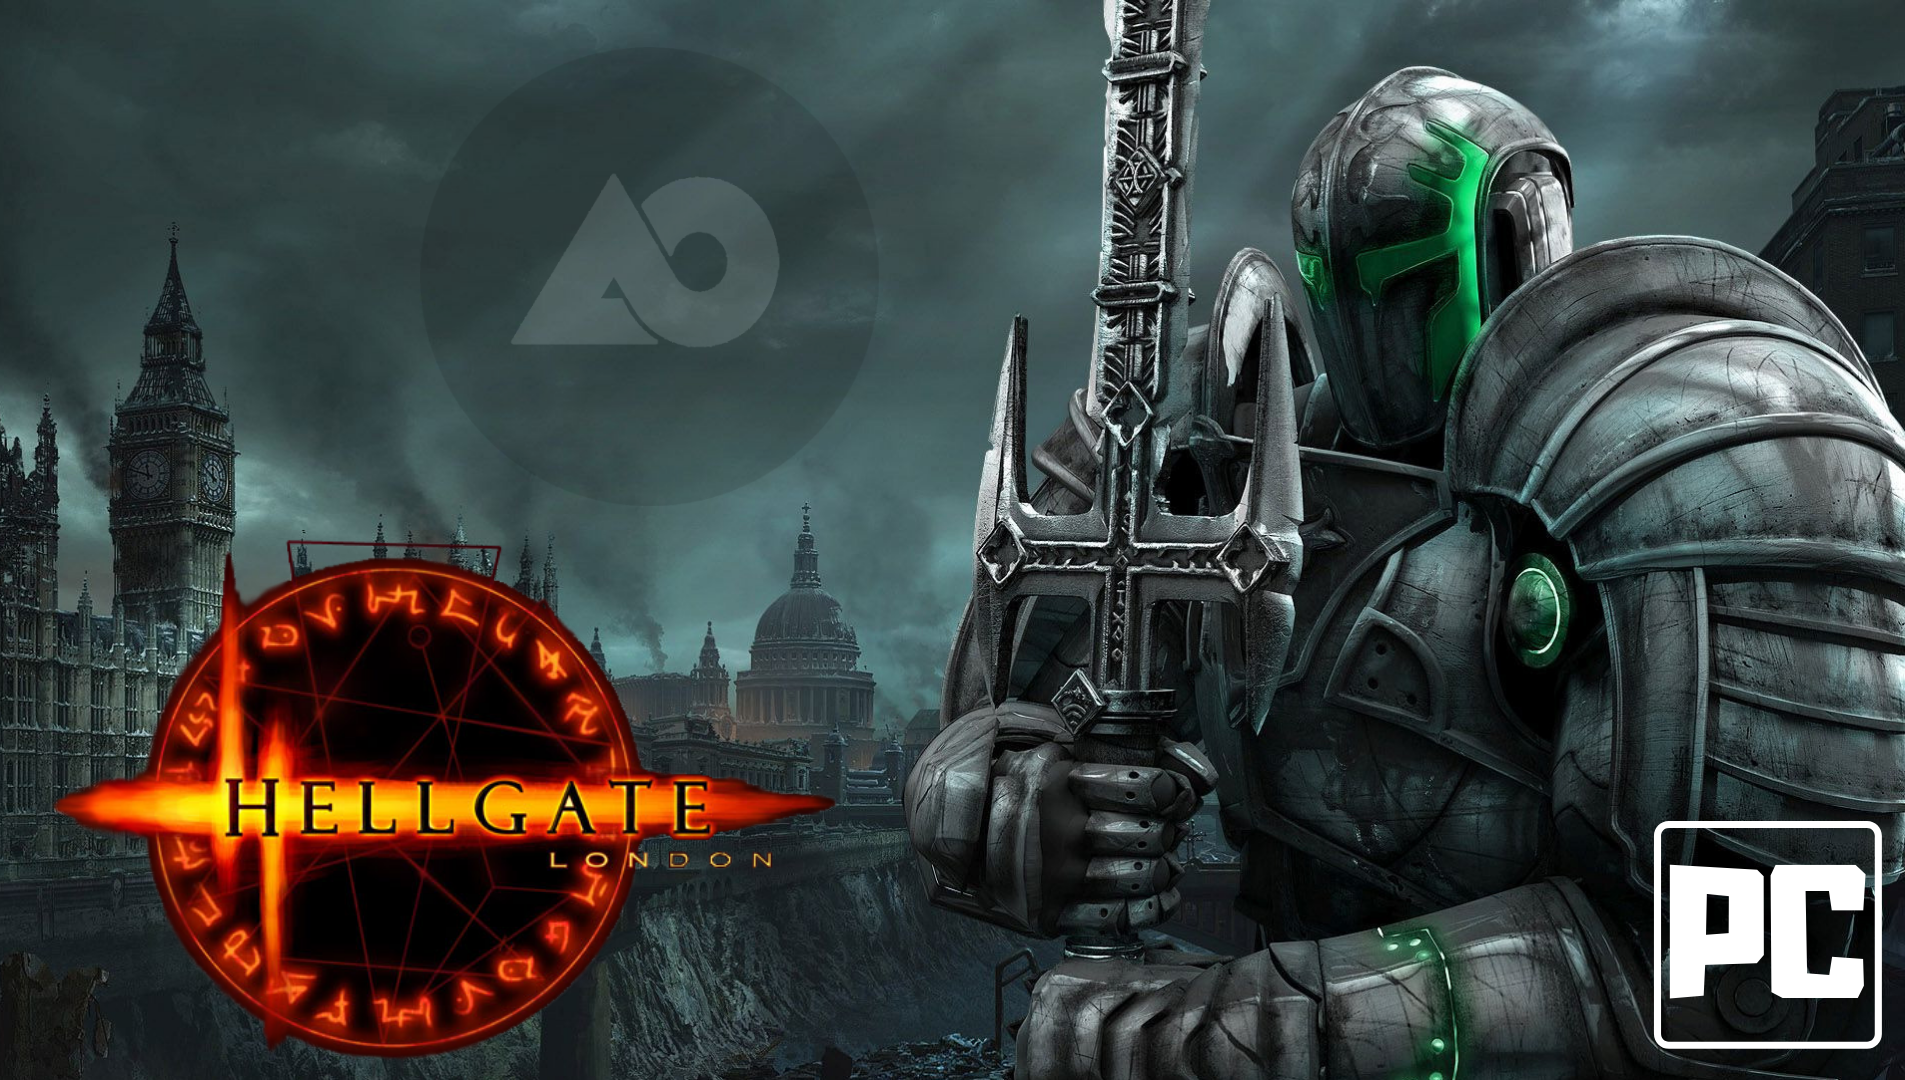 hellgate london free to play